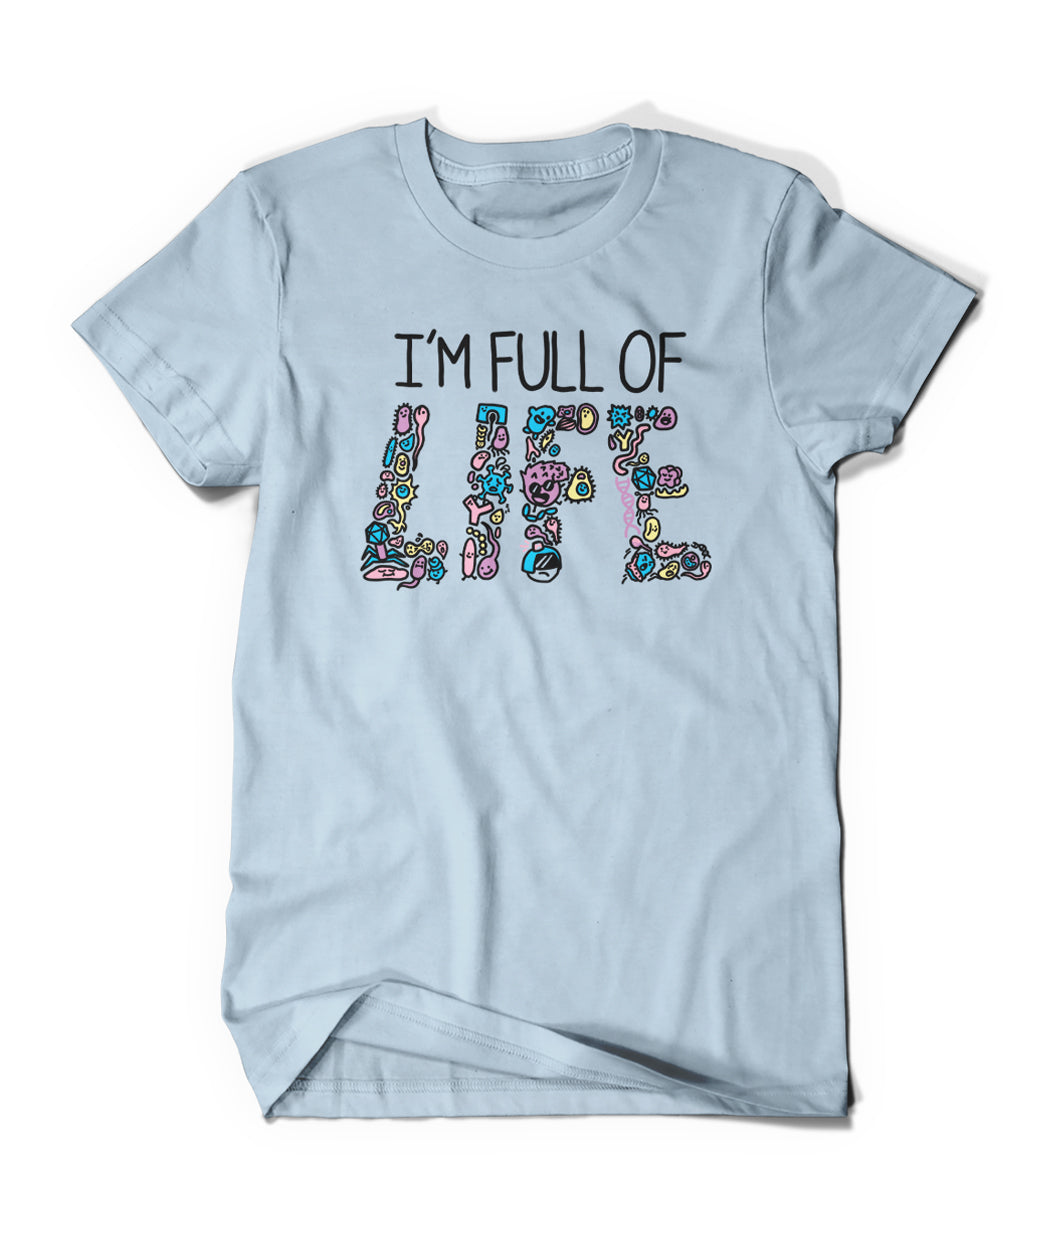 Light blue shirt with “I’m Full Of” in black sans serif font across chest. Below, “Life” is written and made up of various cartoon drawn microbes and bacteria of varying colors - from Minute Earth